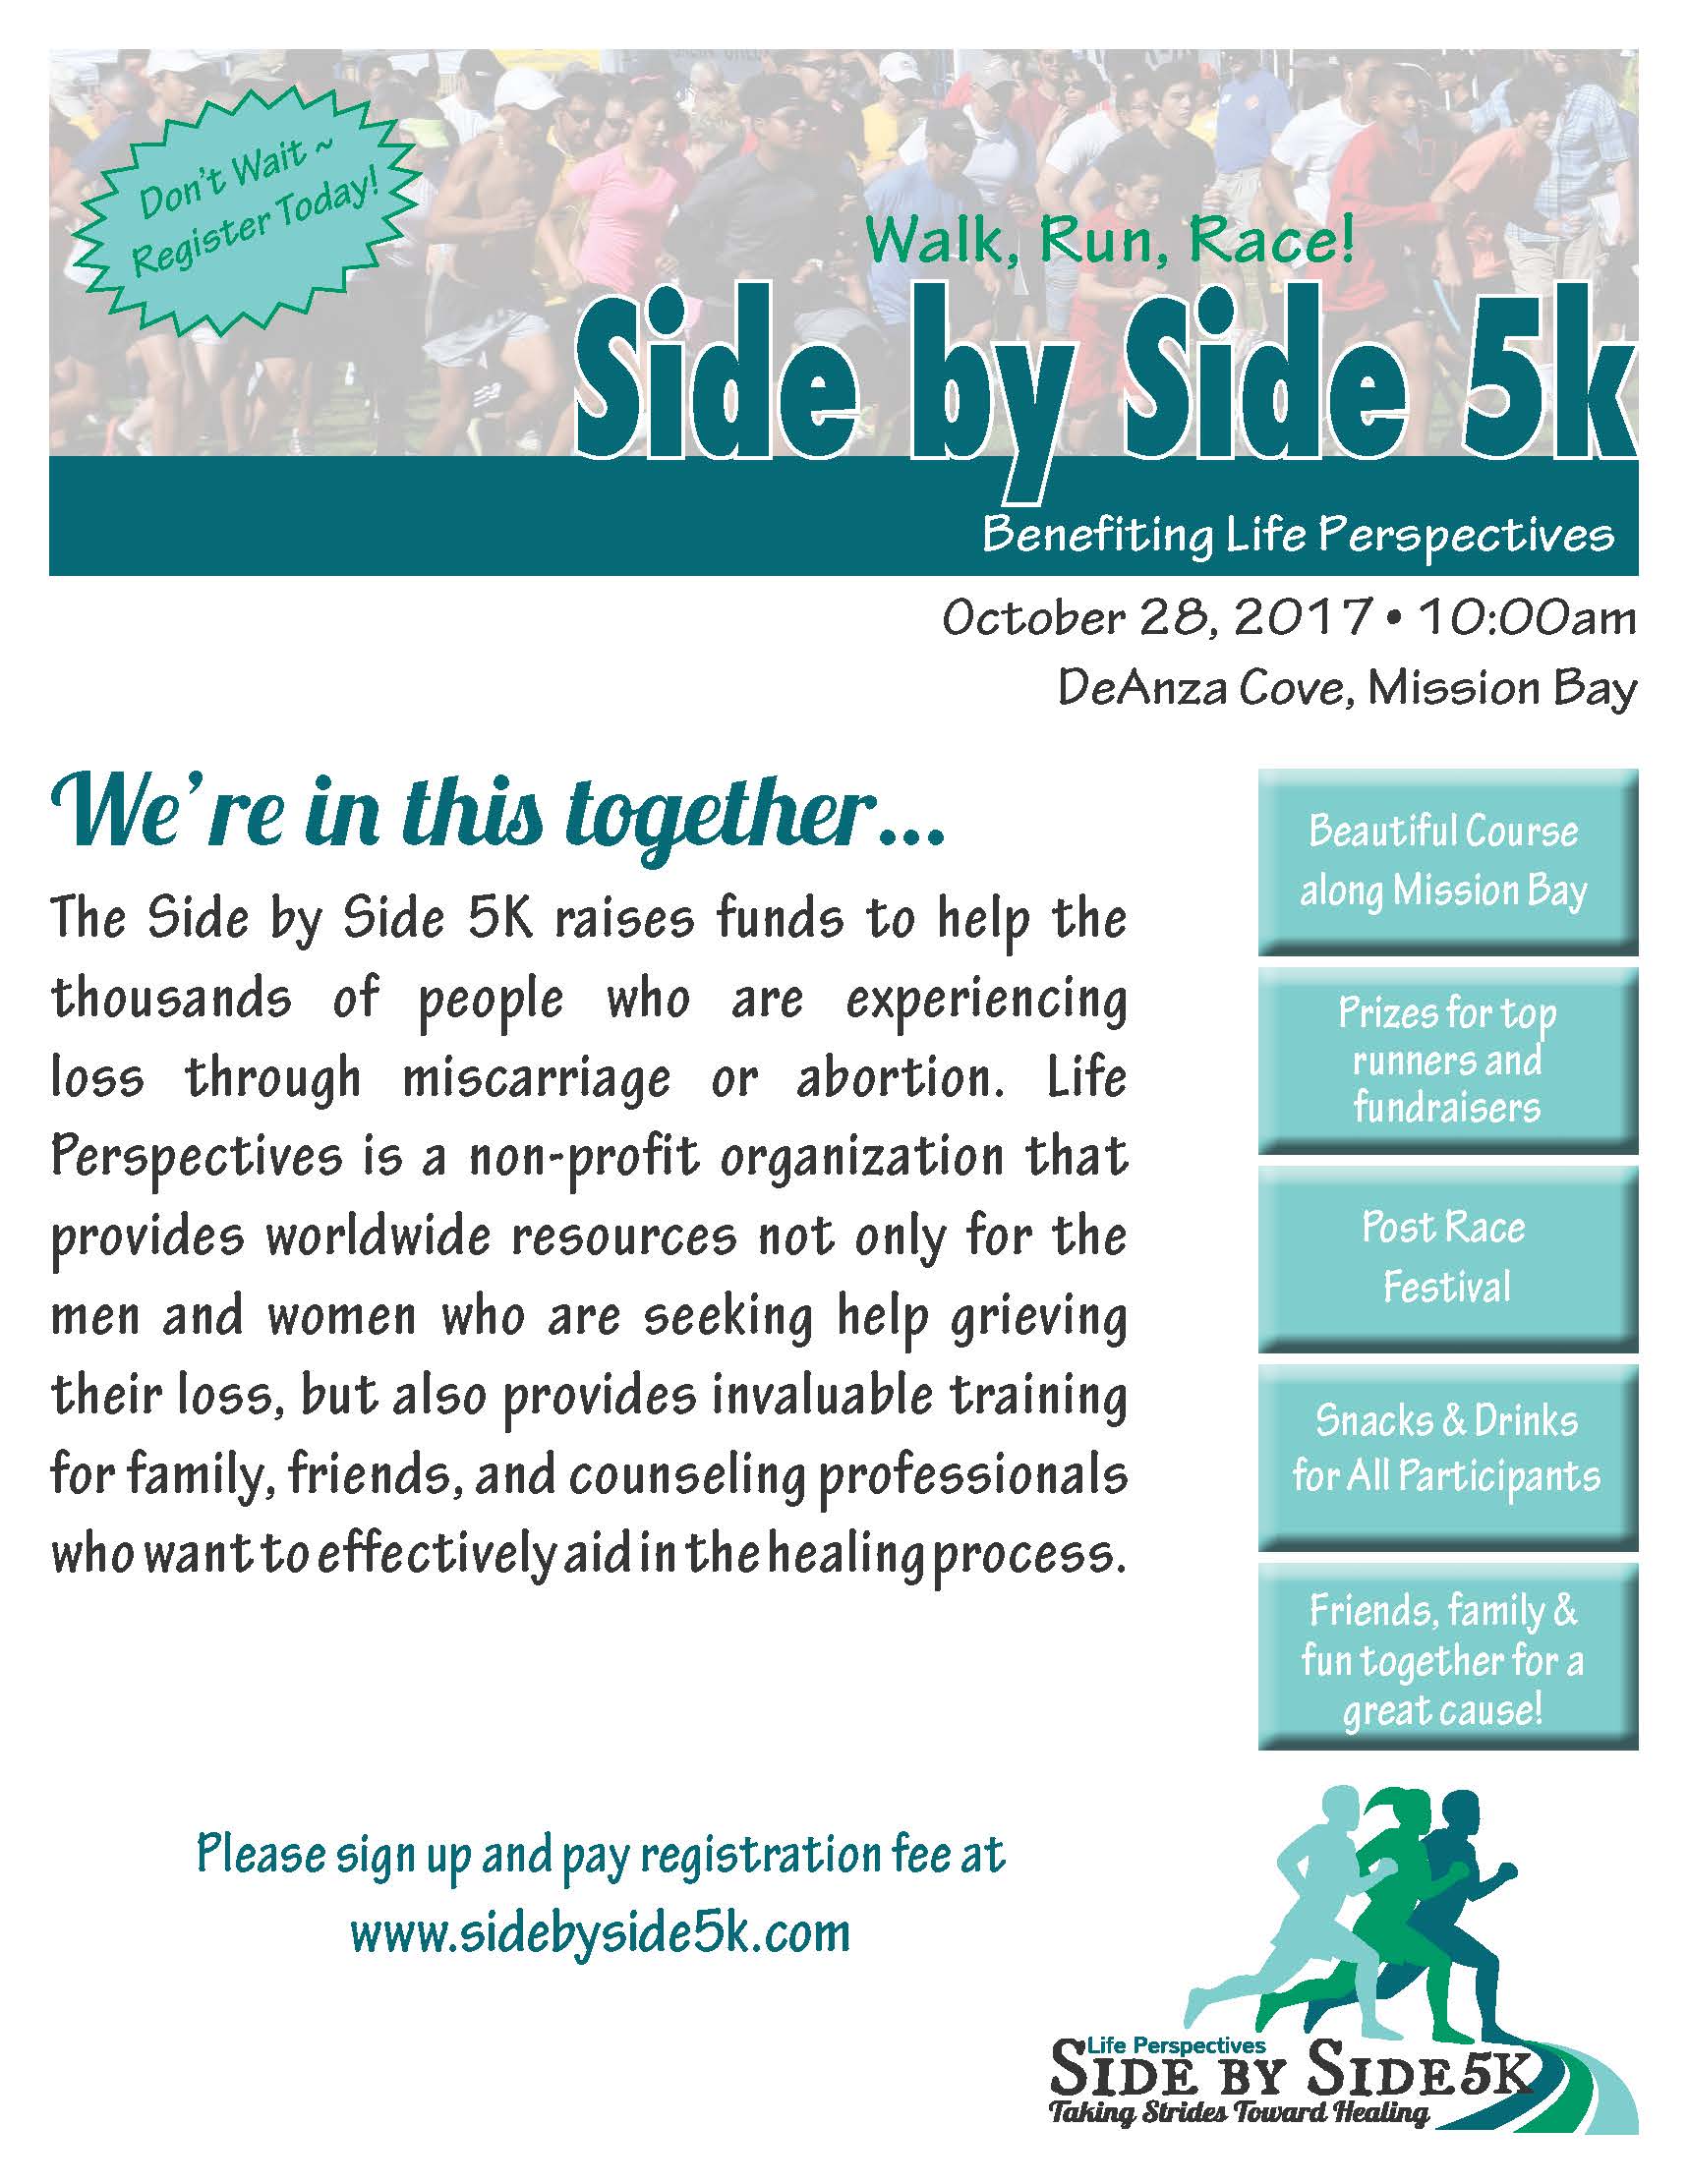 Side by Side 5K for Life Perspectives